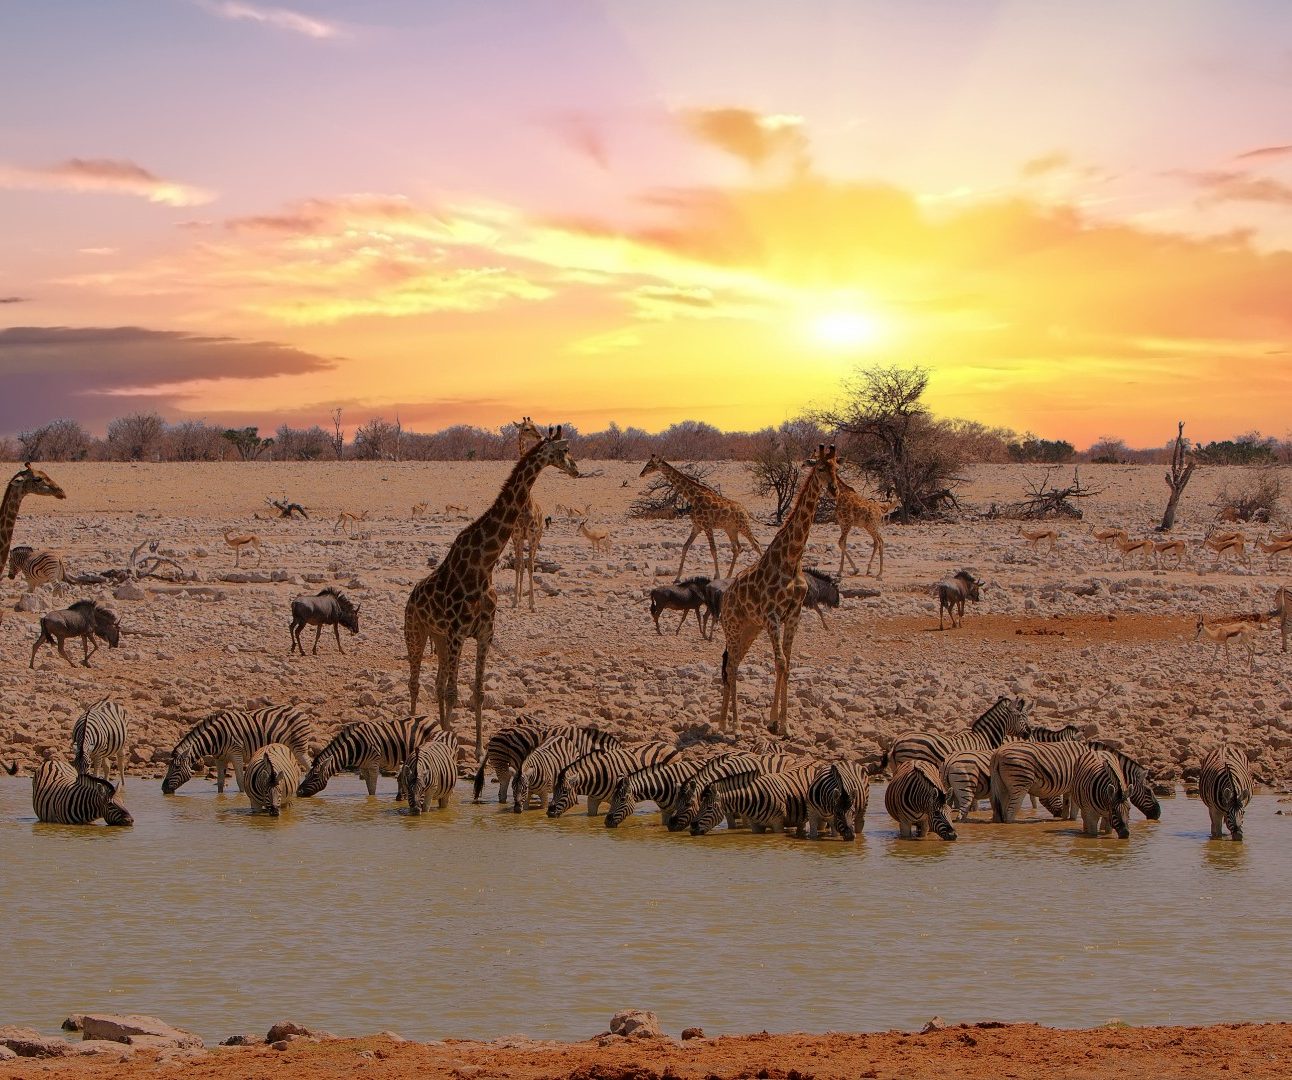 A sunset over he African savannah with zebra, giraffe and other animals drinking from a watering hole